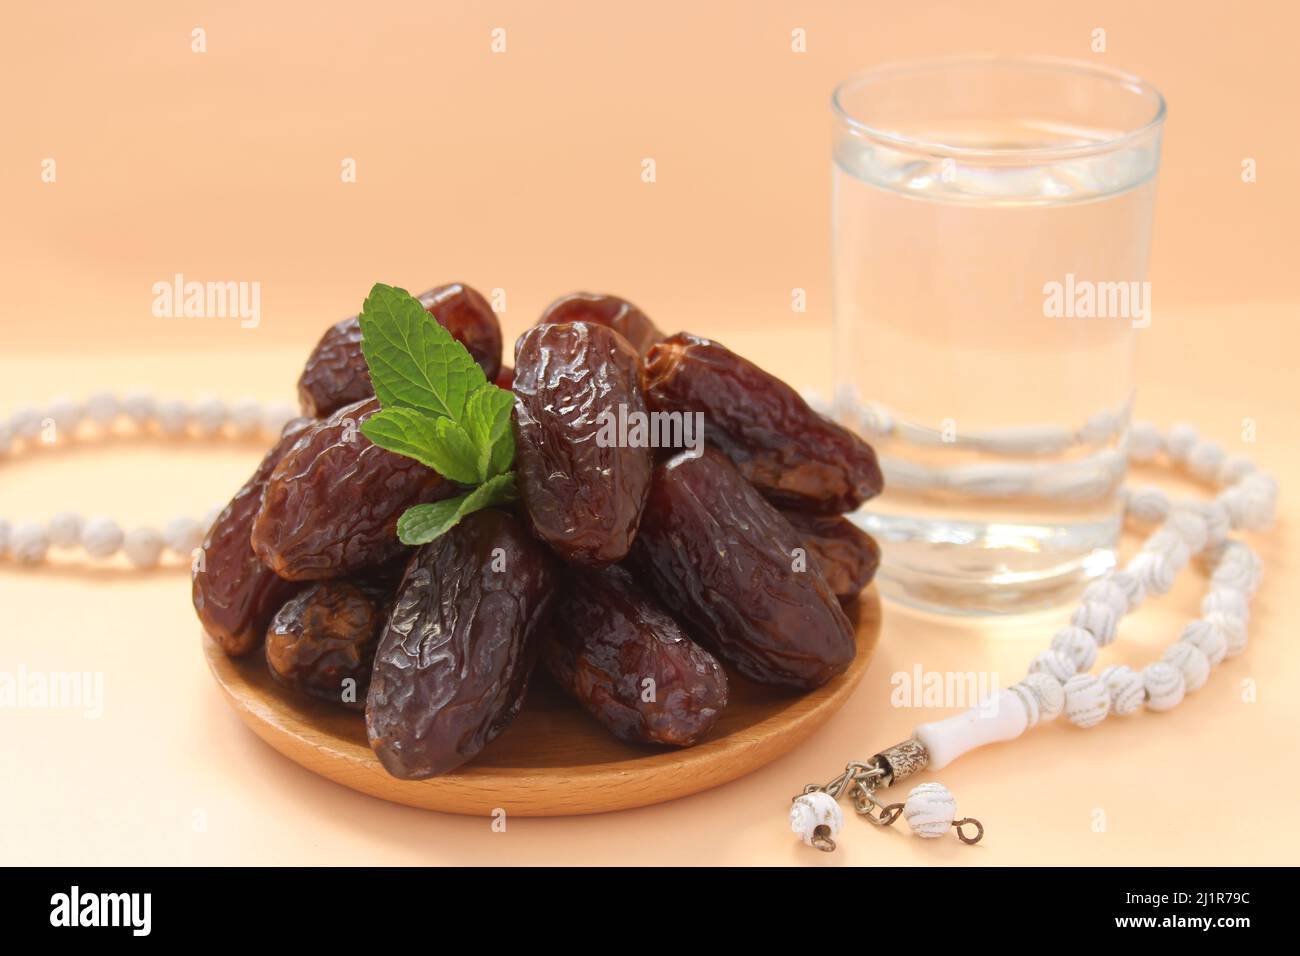 Date fruits in wooden plate, glass of water and white prayer beads. Fresh fruits for iftar. Ramadan concept idea photo. Stock Photo